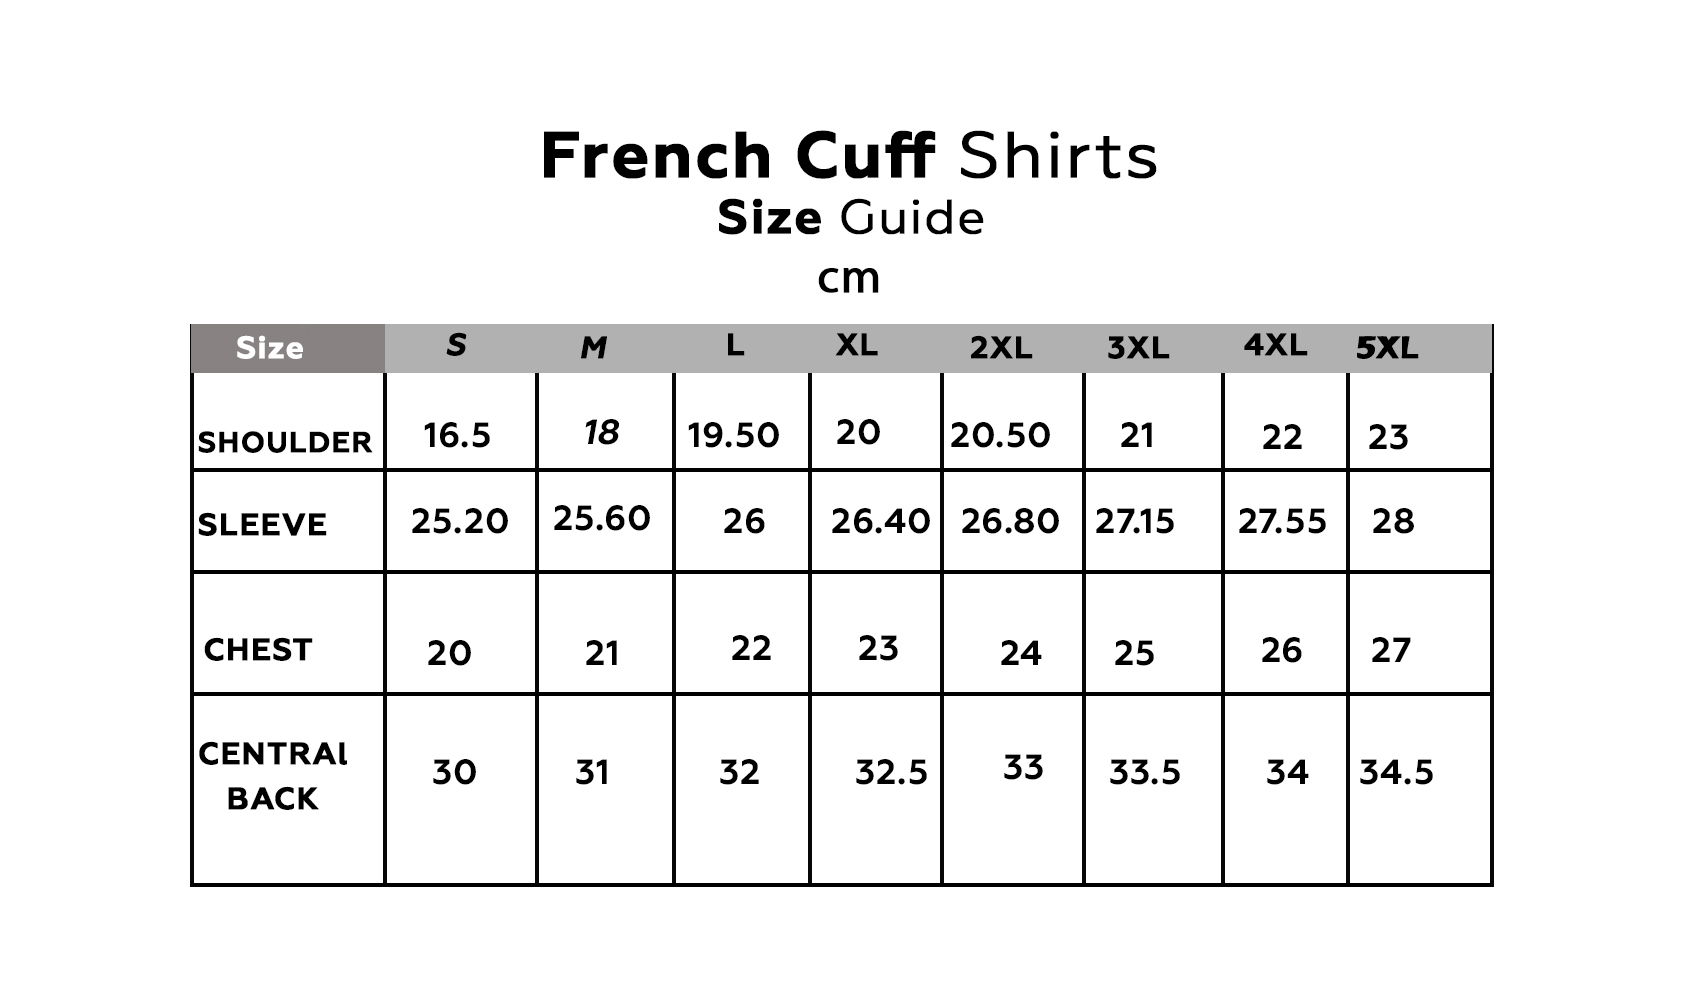 Tan Mens Slim Fit French Cuff Shirts With Cufflink Holes - Casual And Formal